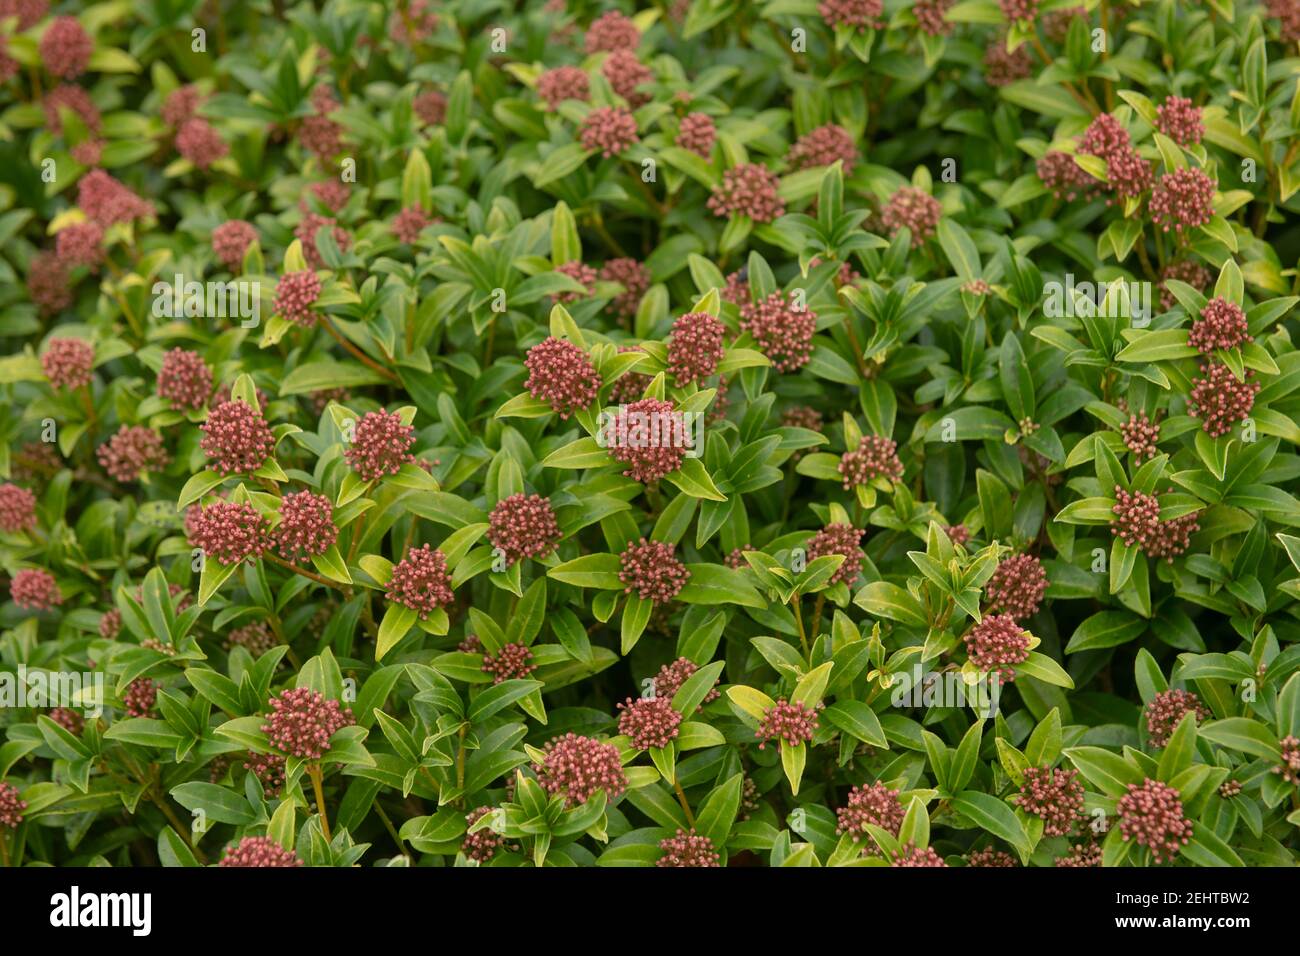 Winter Foliage and Pink Flower Buds of an Evergreen Japanese Skimmia Shrub (Skimmia japonica 'Godrie's Dwarf') Growing in a Country Cottage Garden Stock Photo